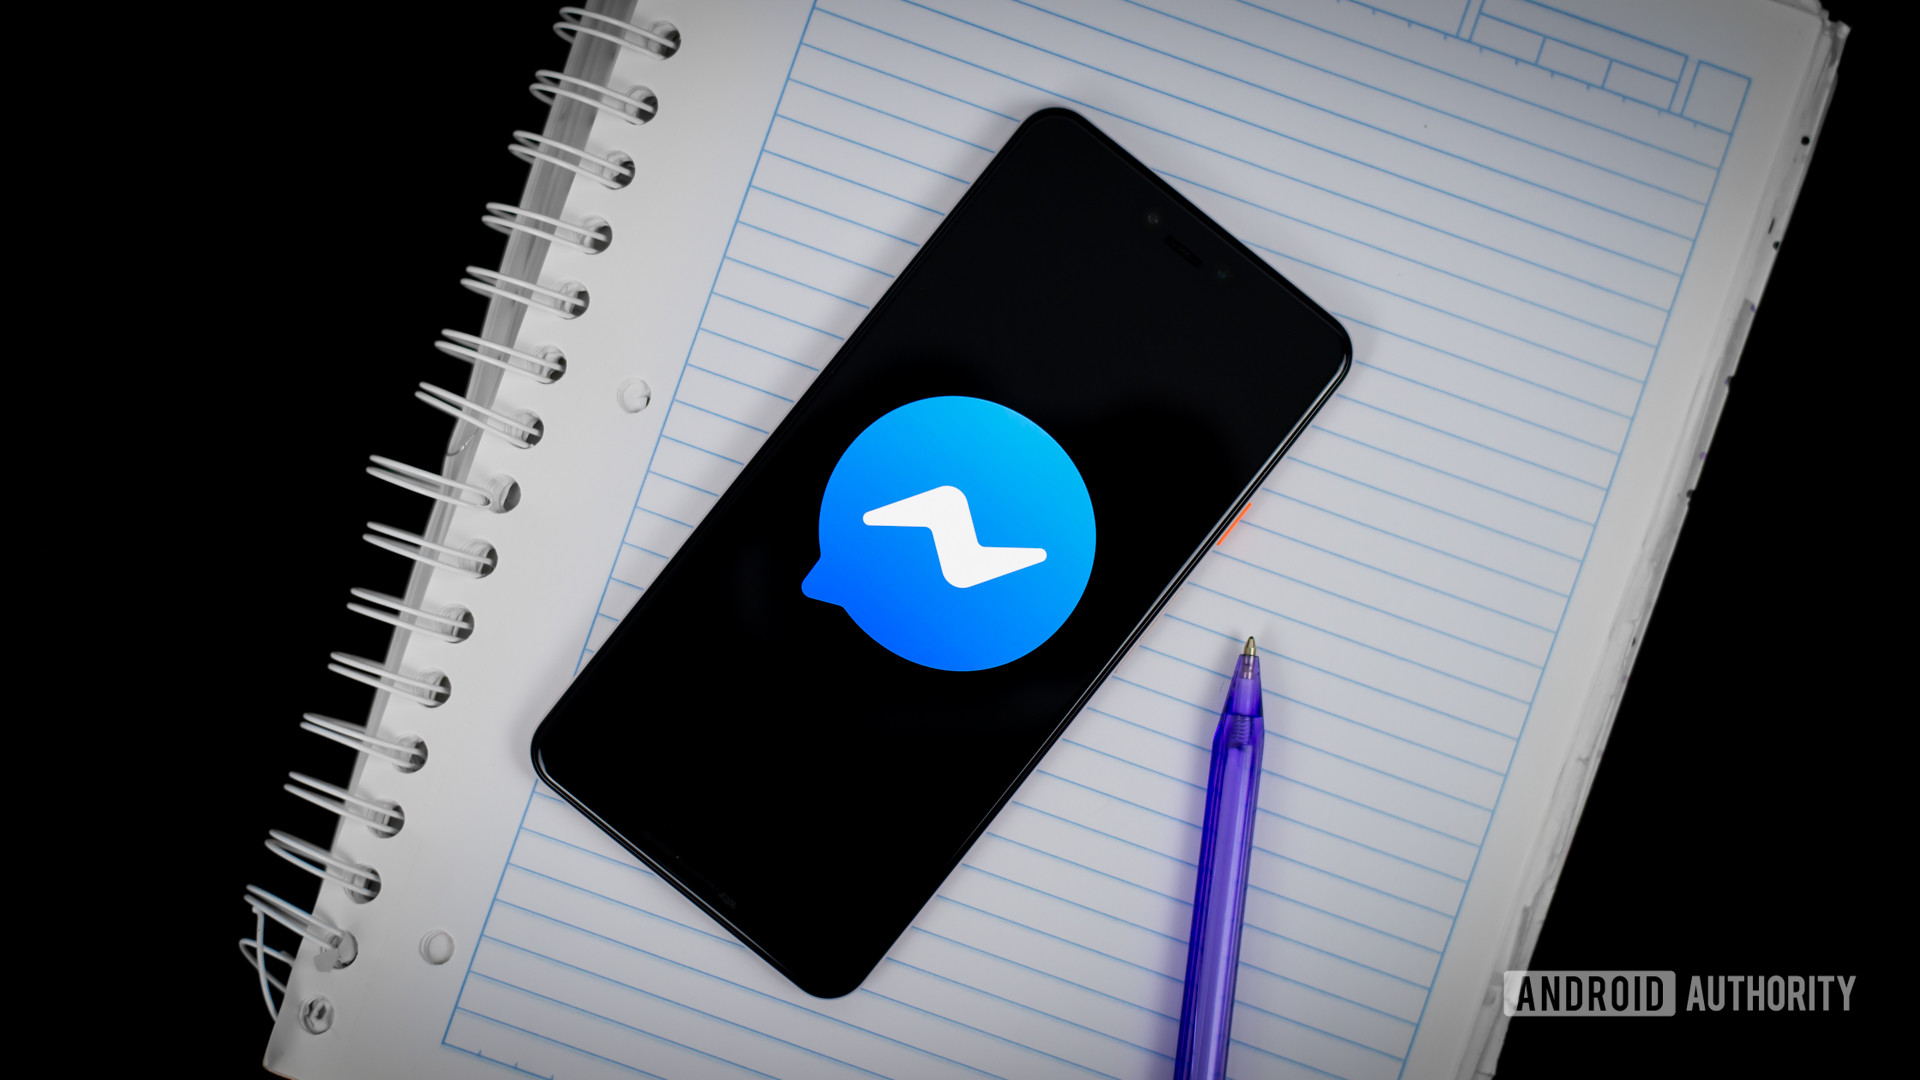 Facebook Messenger: 20 awesome tips and tricks you may not know